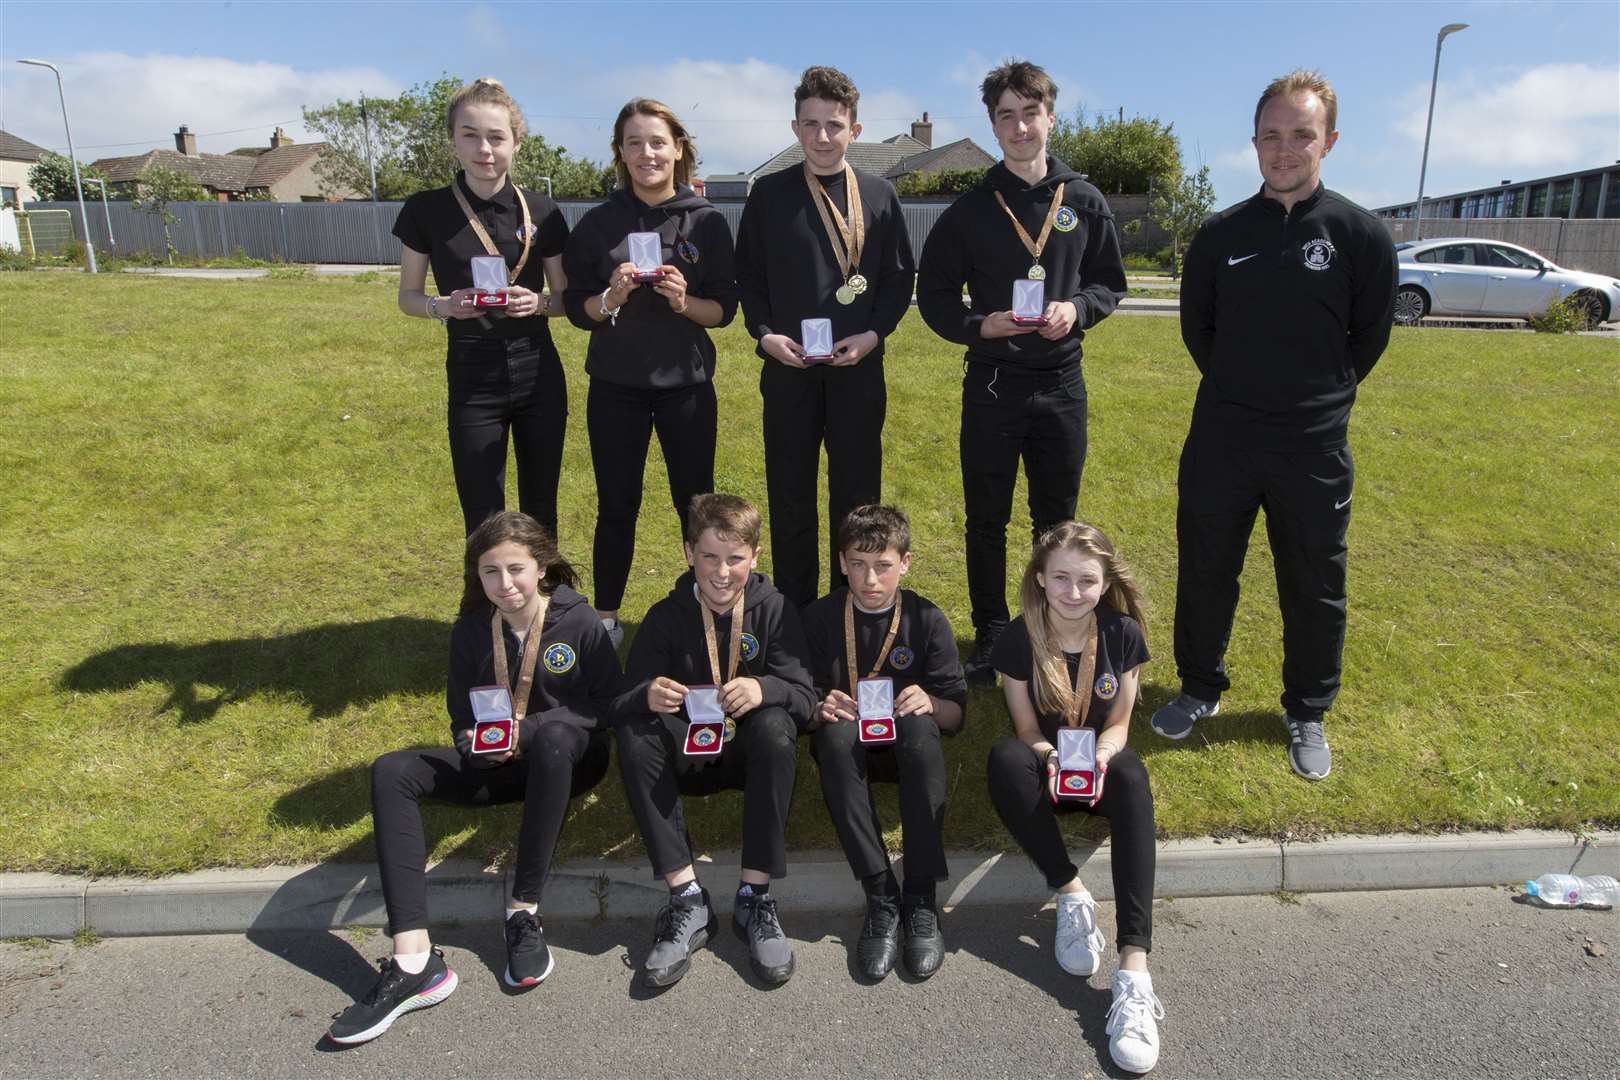 Wick High School's sports pupils of the year pose for a photograph. They are (from left, front) S1 Ellie Salim, Matthew Aitkenhead, S2 Lewis Gill, Kianna Bremner, (back) S3 Anna Swanson, Tashy Cormack, Alan Mathieson, and senior Scott MacDonald. Unable to pick up their awards were Sarah Henstridge from S1 and seniors Shannon Campbell, Kirsty Robertson and Ross Mackay. The awards were handed over by Wick Academy player Richard Macadie. Picture: Robert MacDonald / Northern Studios